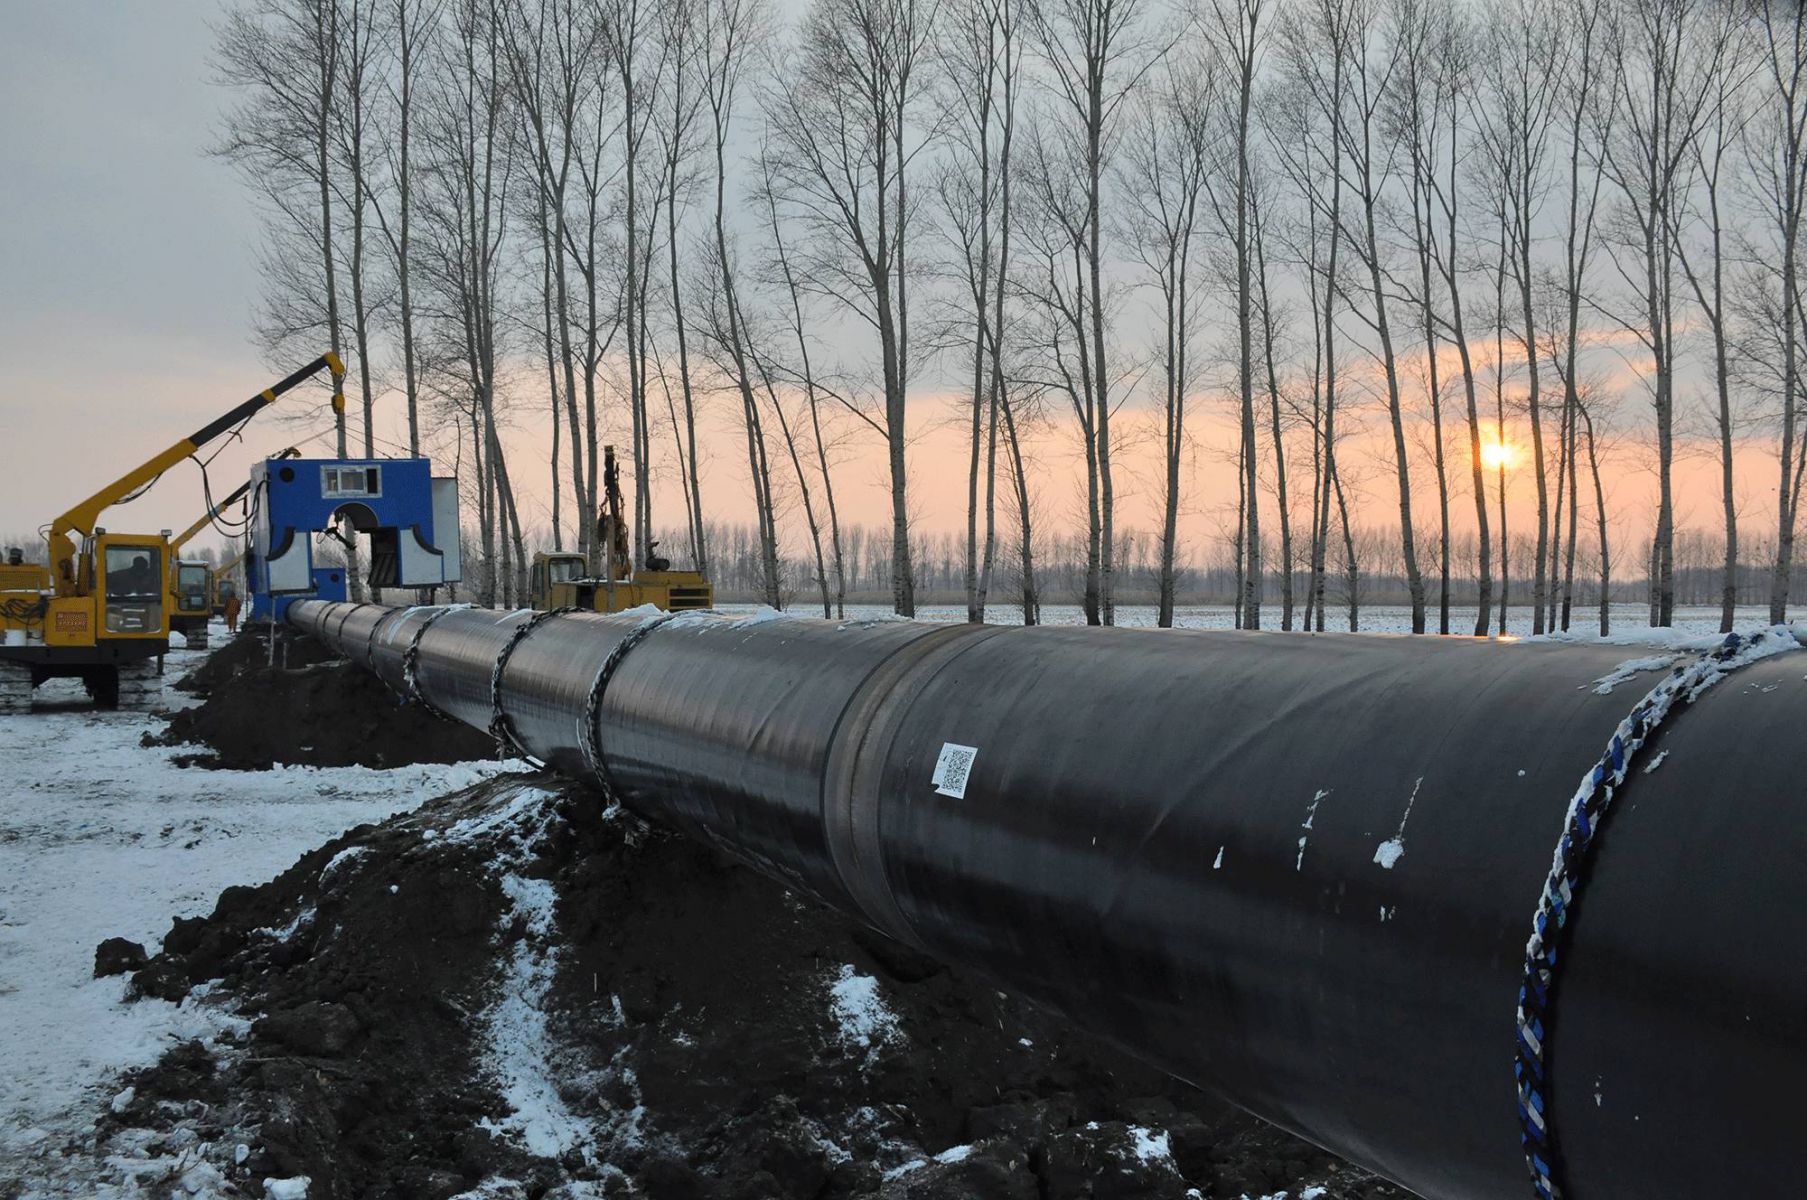 The shield tunnel for second China-Russia Oil Pipeline has reached 300 meters